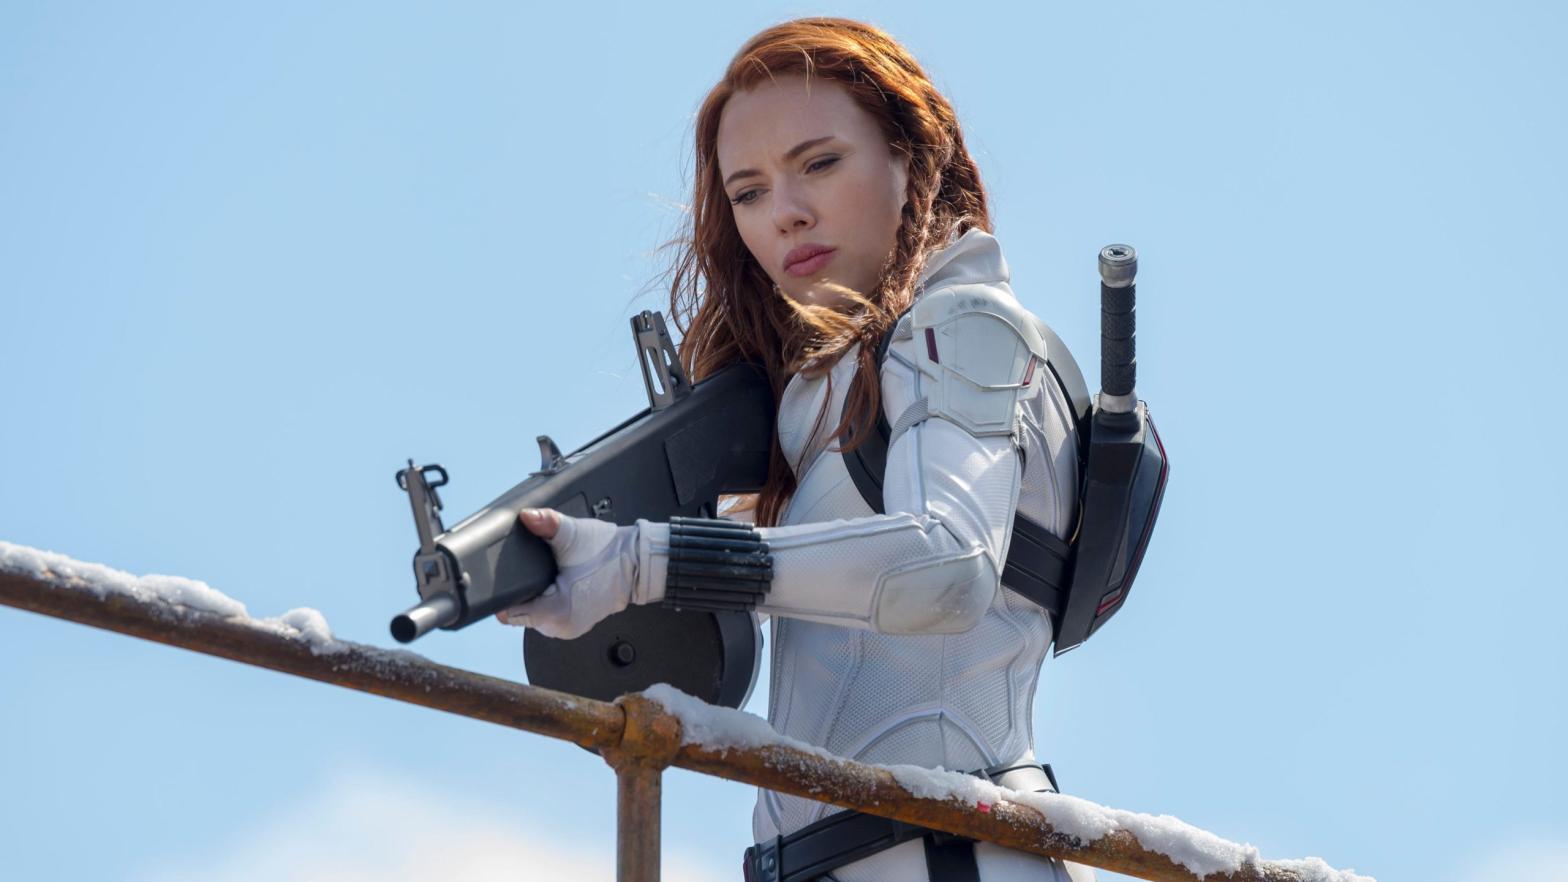 Currently, Disney's lawyers are taking aim at Scarlett Johansson and her lawsuit. (Image: Marvel Studios)